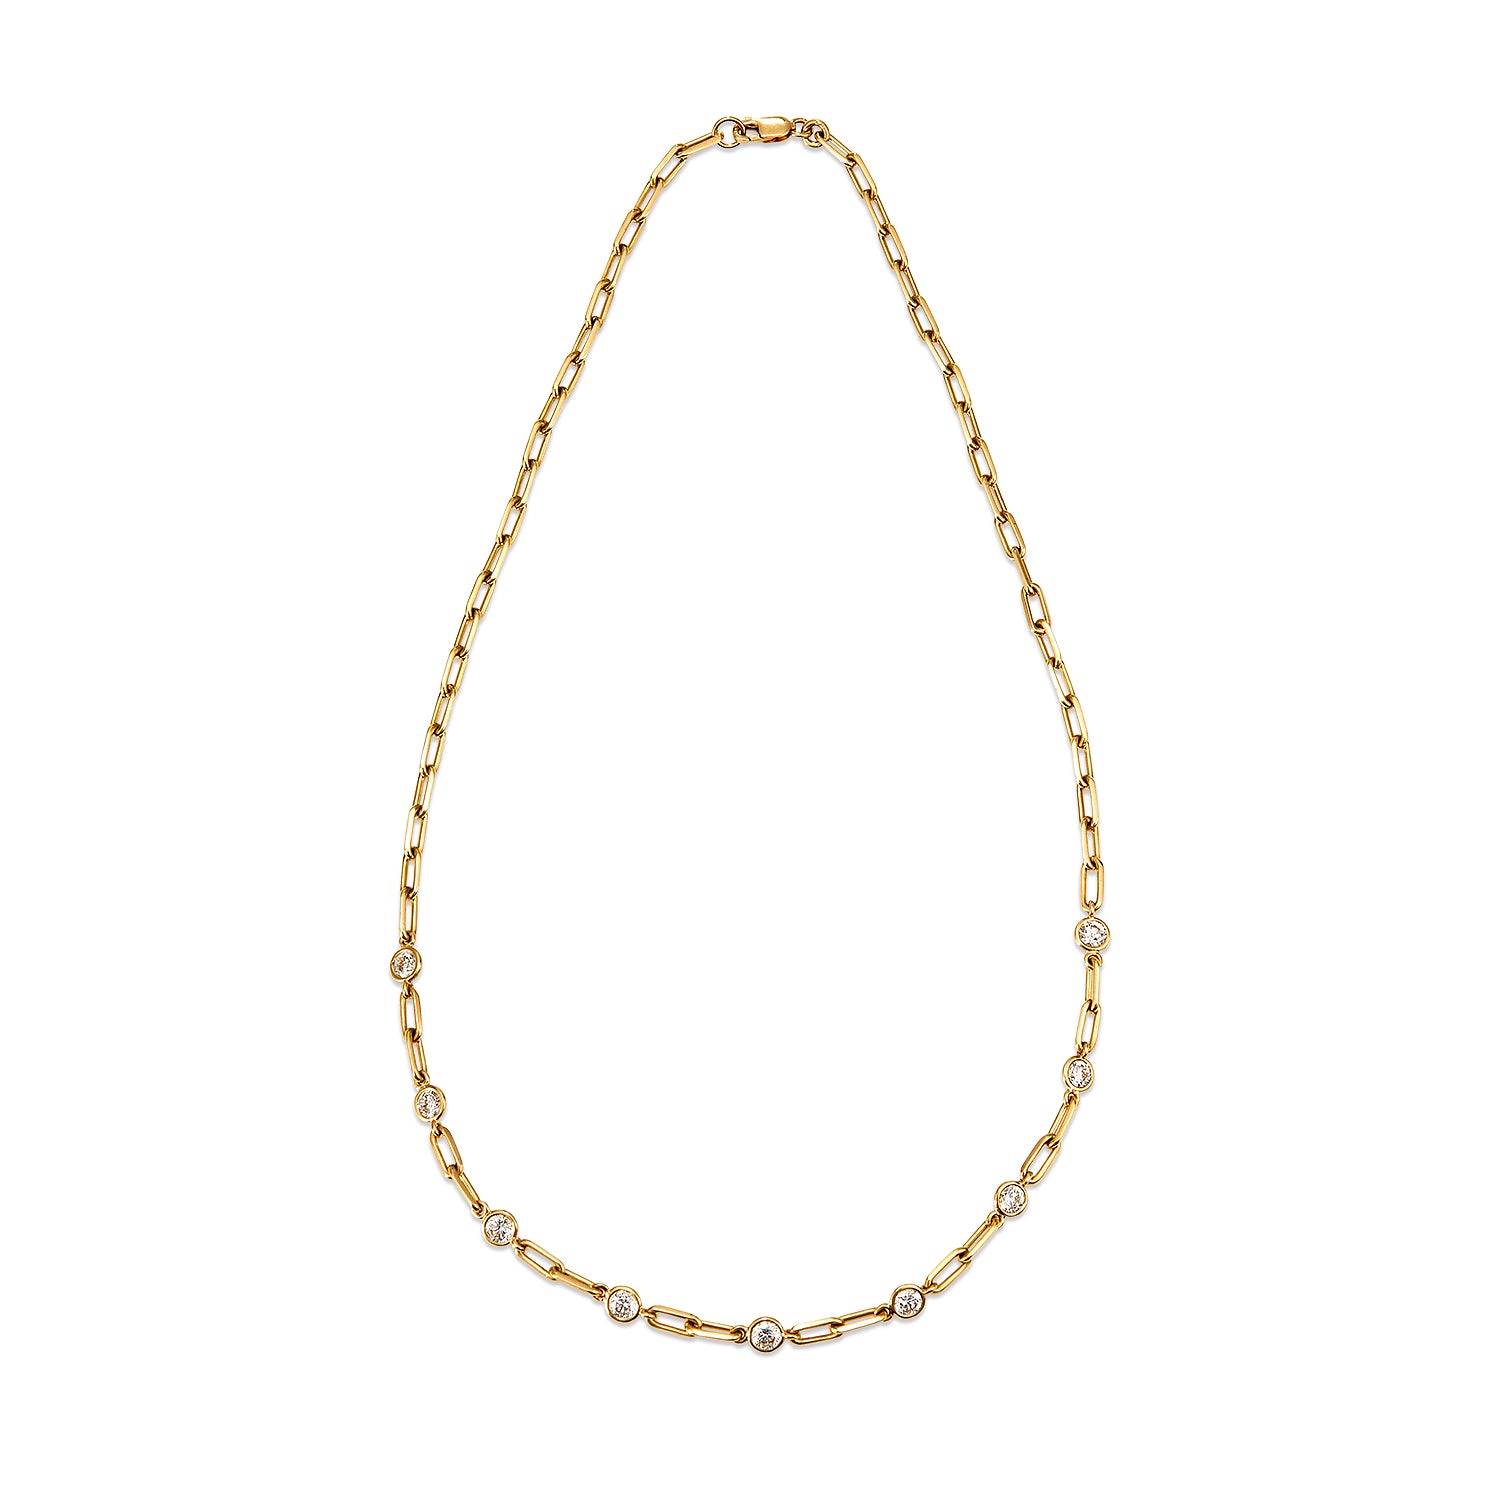 The Modern Tennis Necklace - Long Link Chain Diamond Necklace